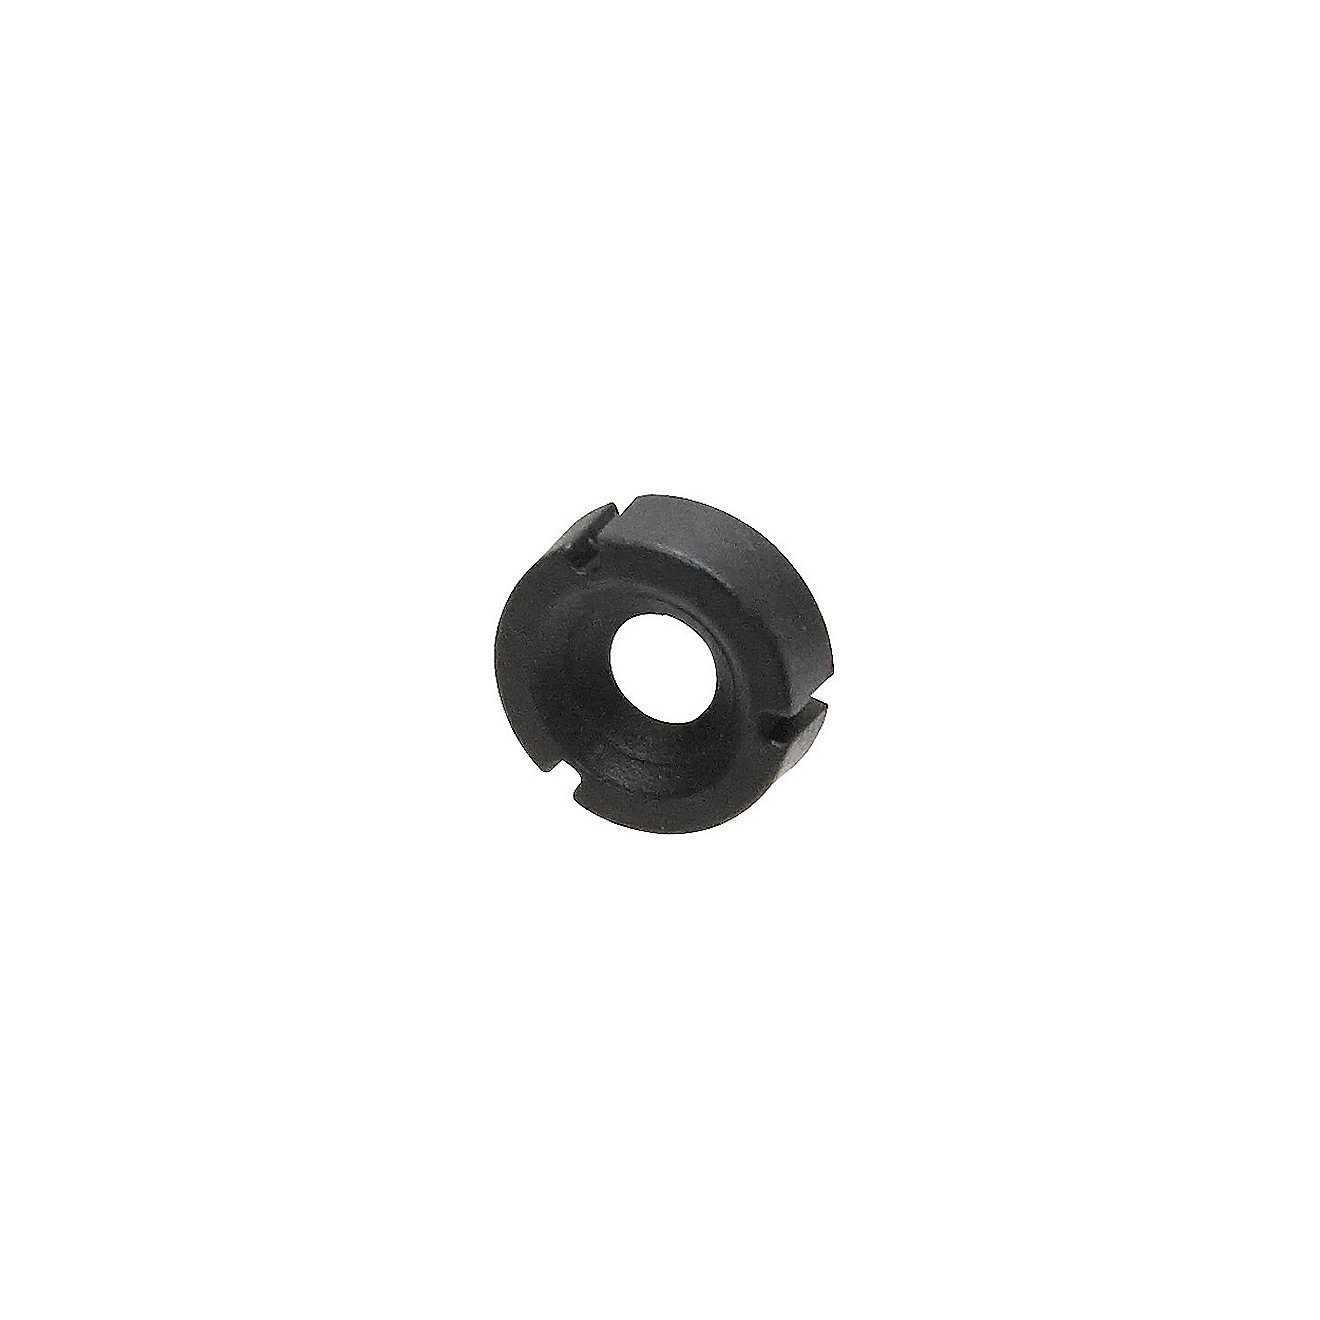 October Mountain Products UltraView 1/4" Peep Sight                                                                              - view number 1